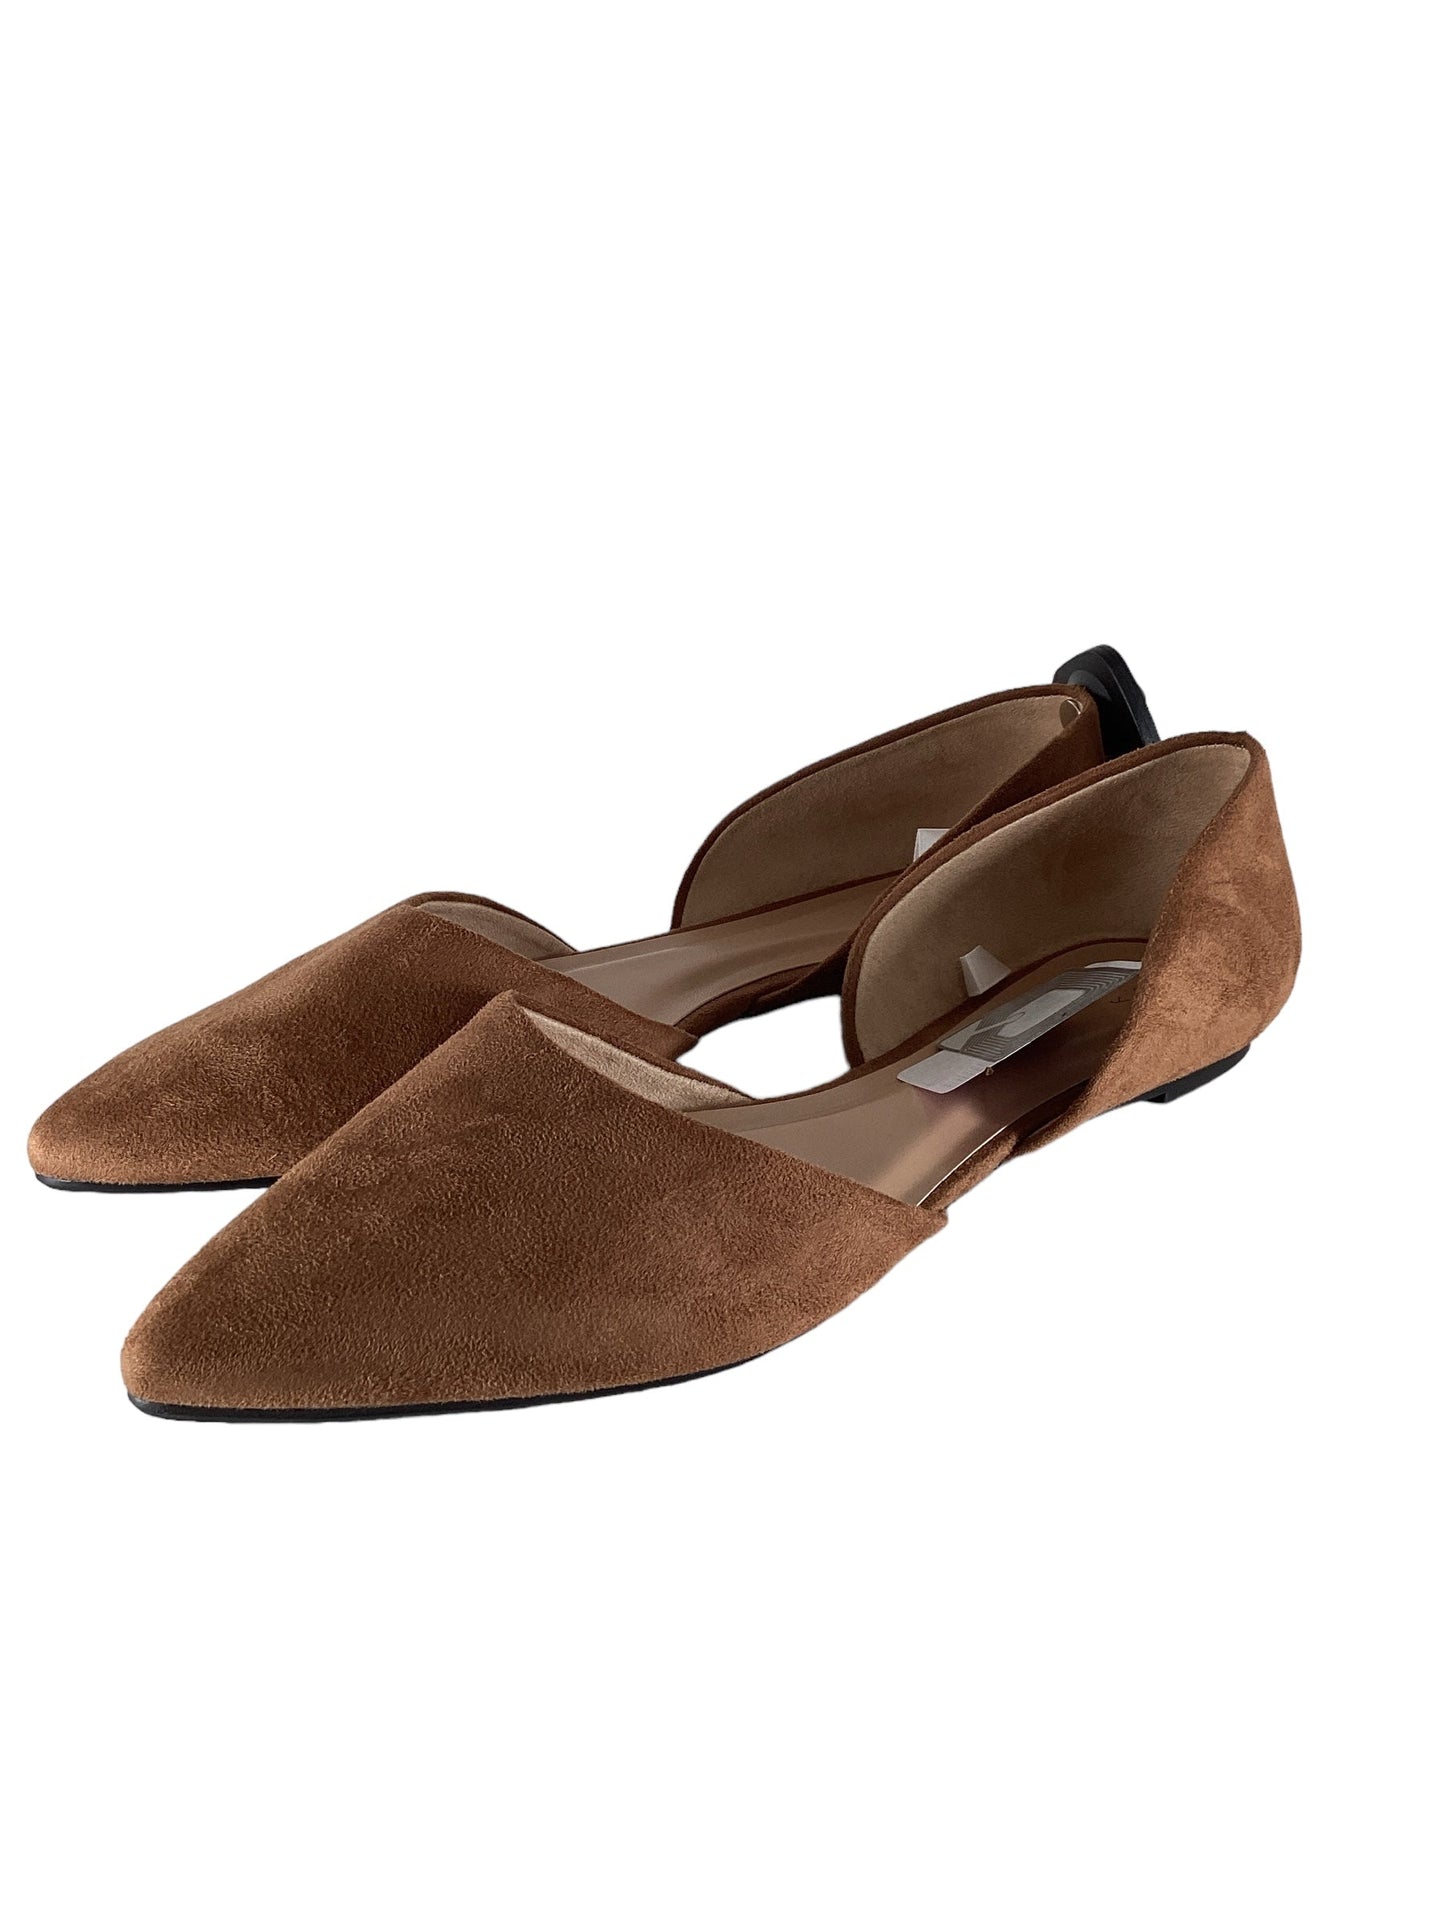 Brown Shoes Flats A New Day, Size 11